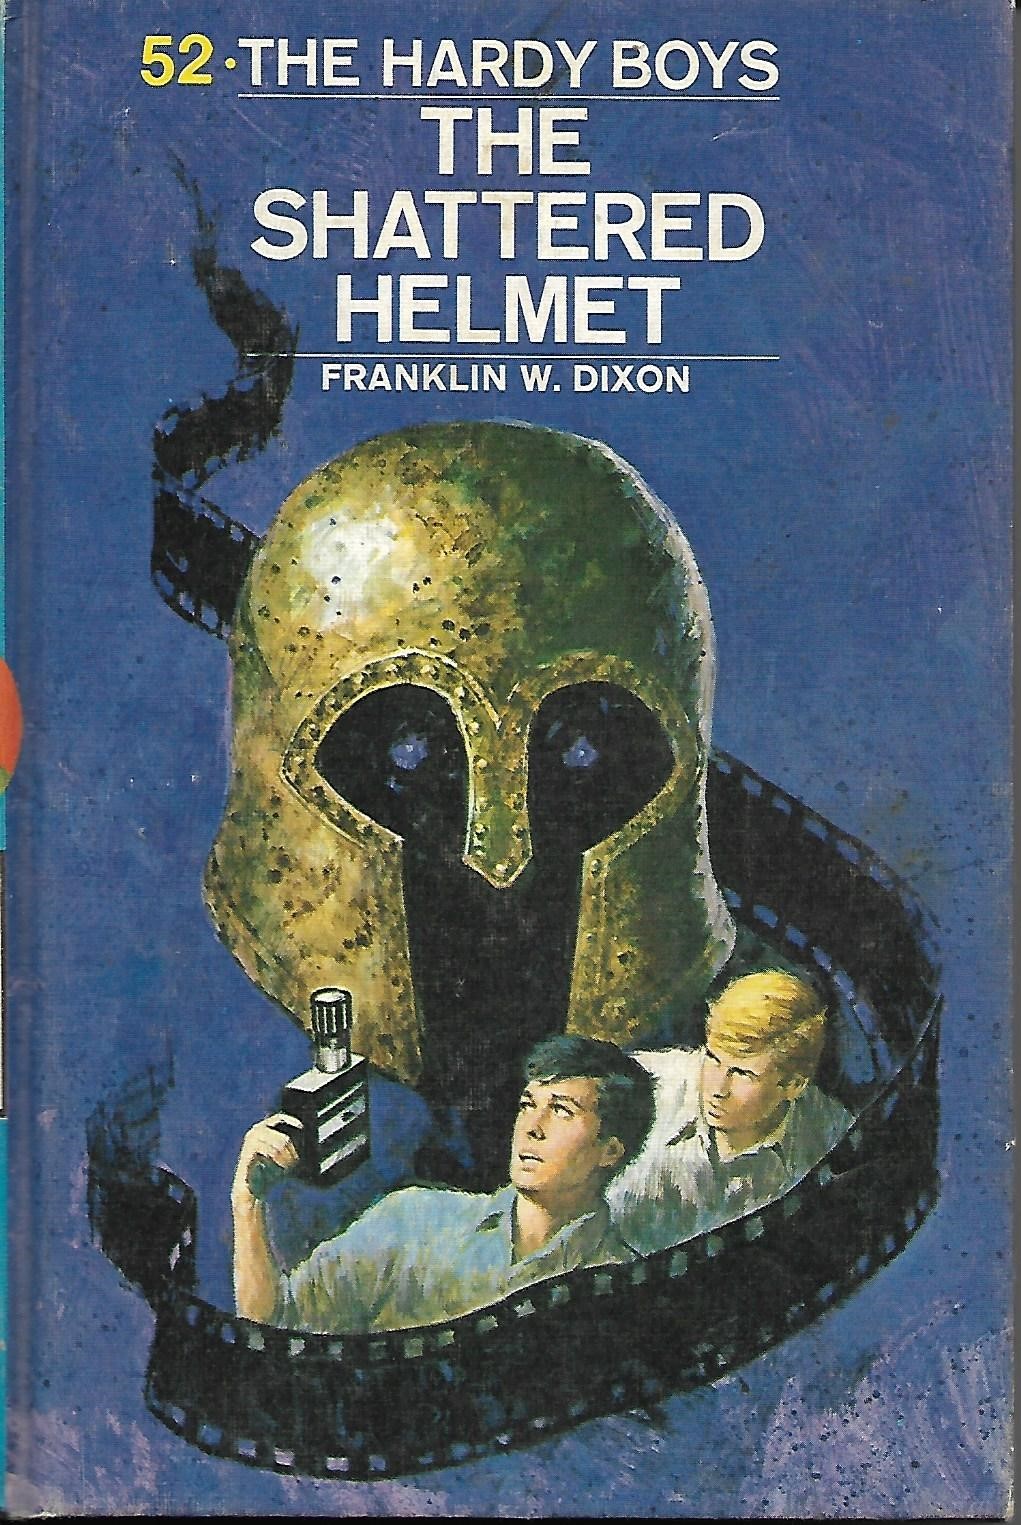 The Shattered Helmet : The Hardy Boys, Book 52 of 190 (Hardcover) Franklin W. Dixon